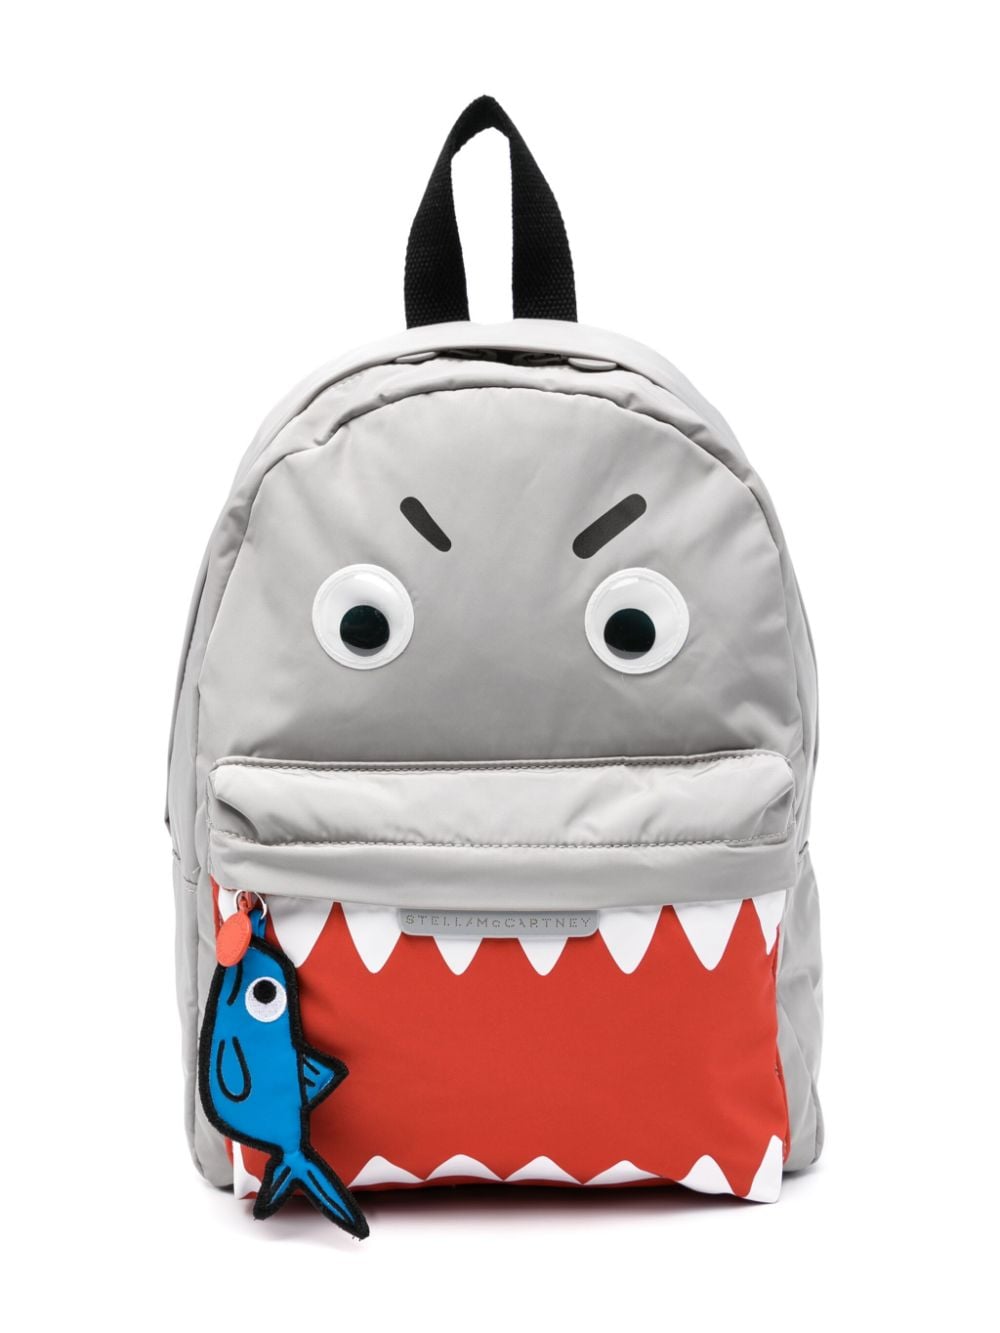 Gray backpack for children with shark print